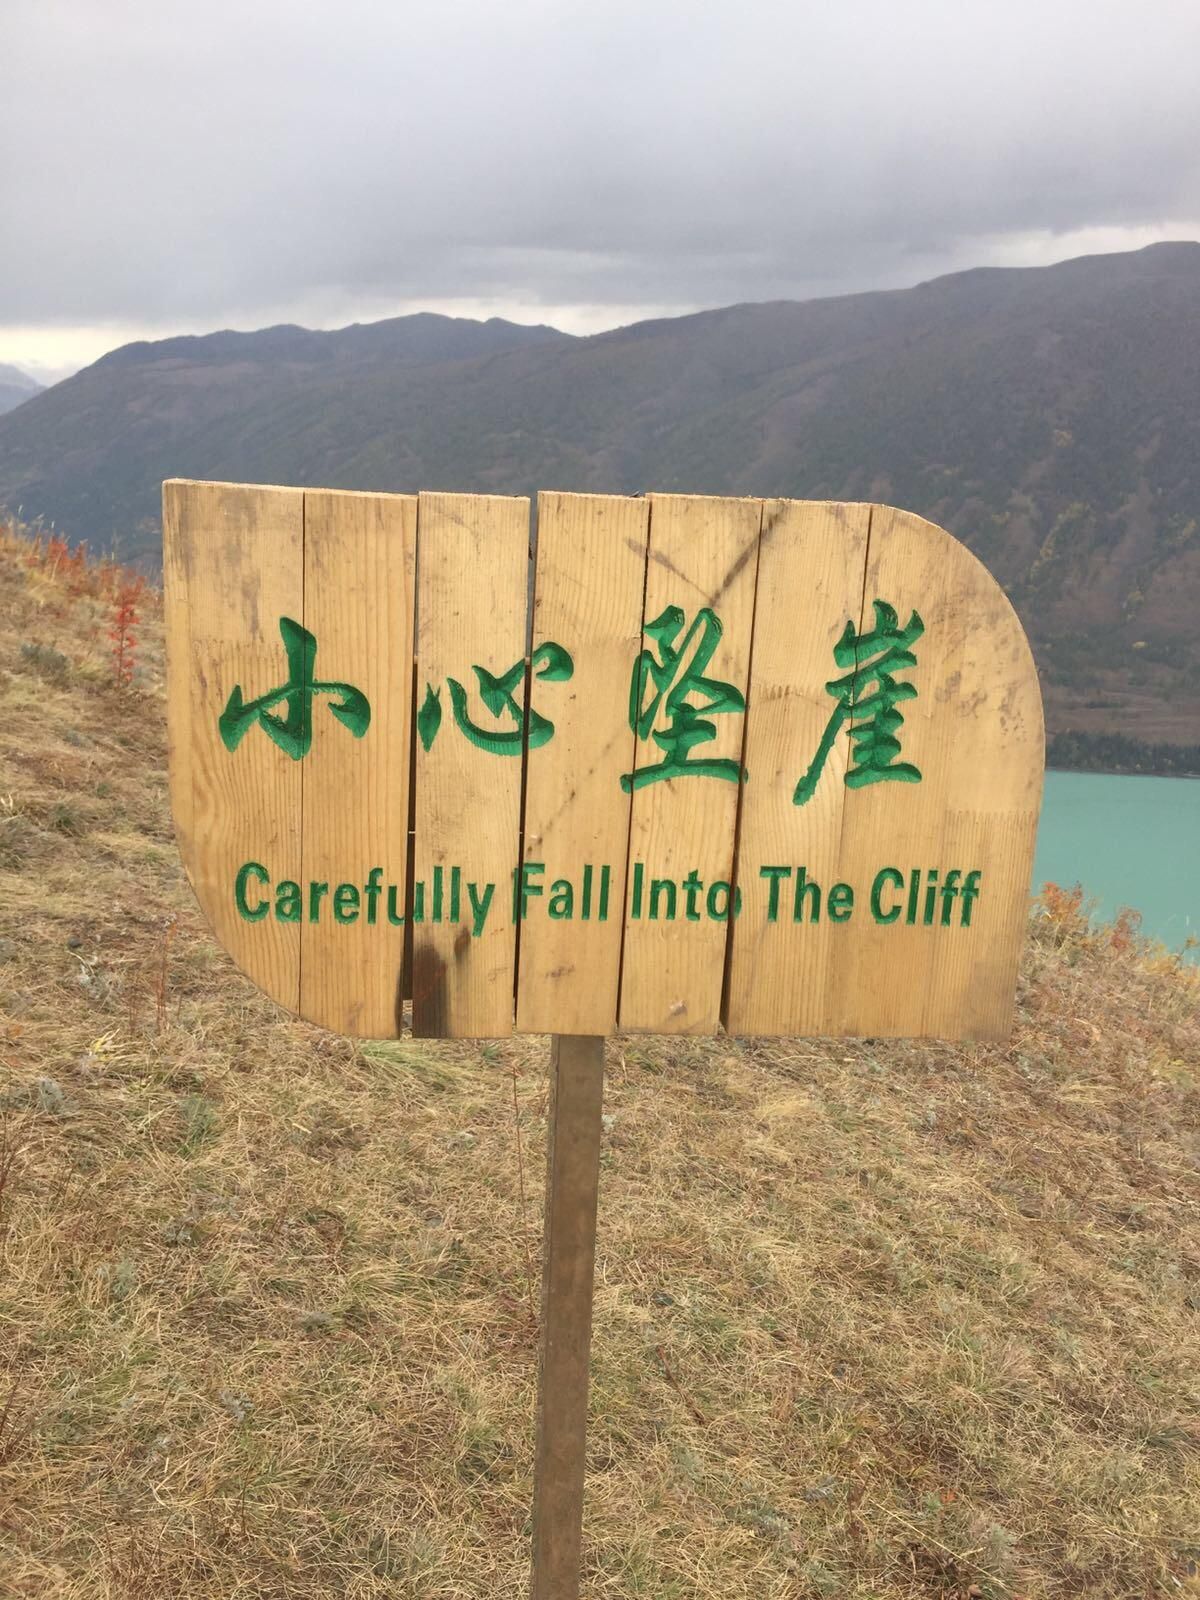 My parents are touring China and spotted this very thoughtful sign...